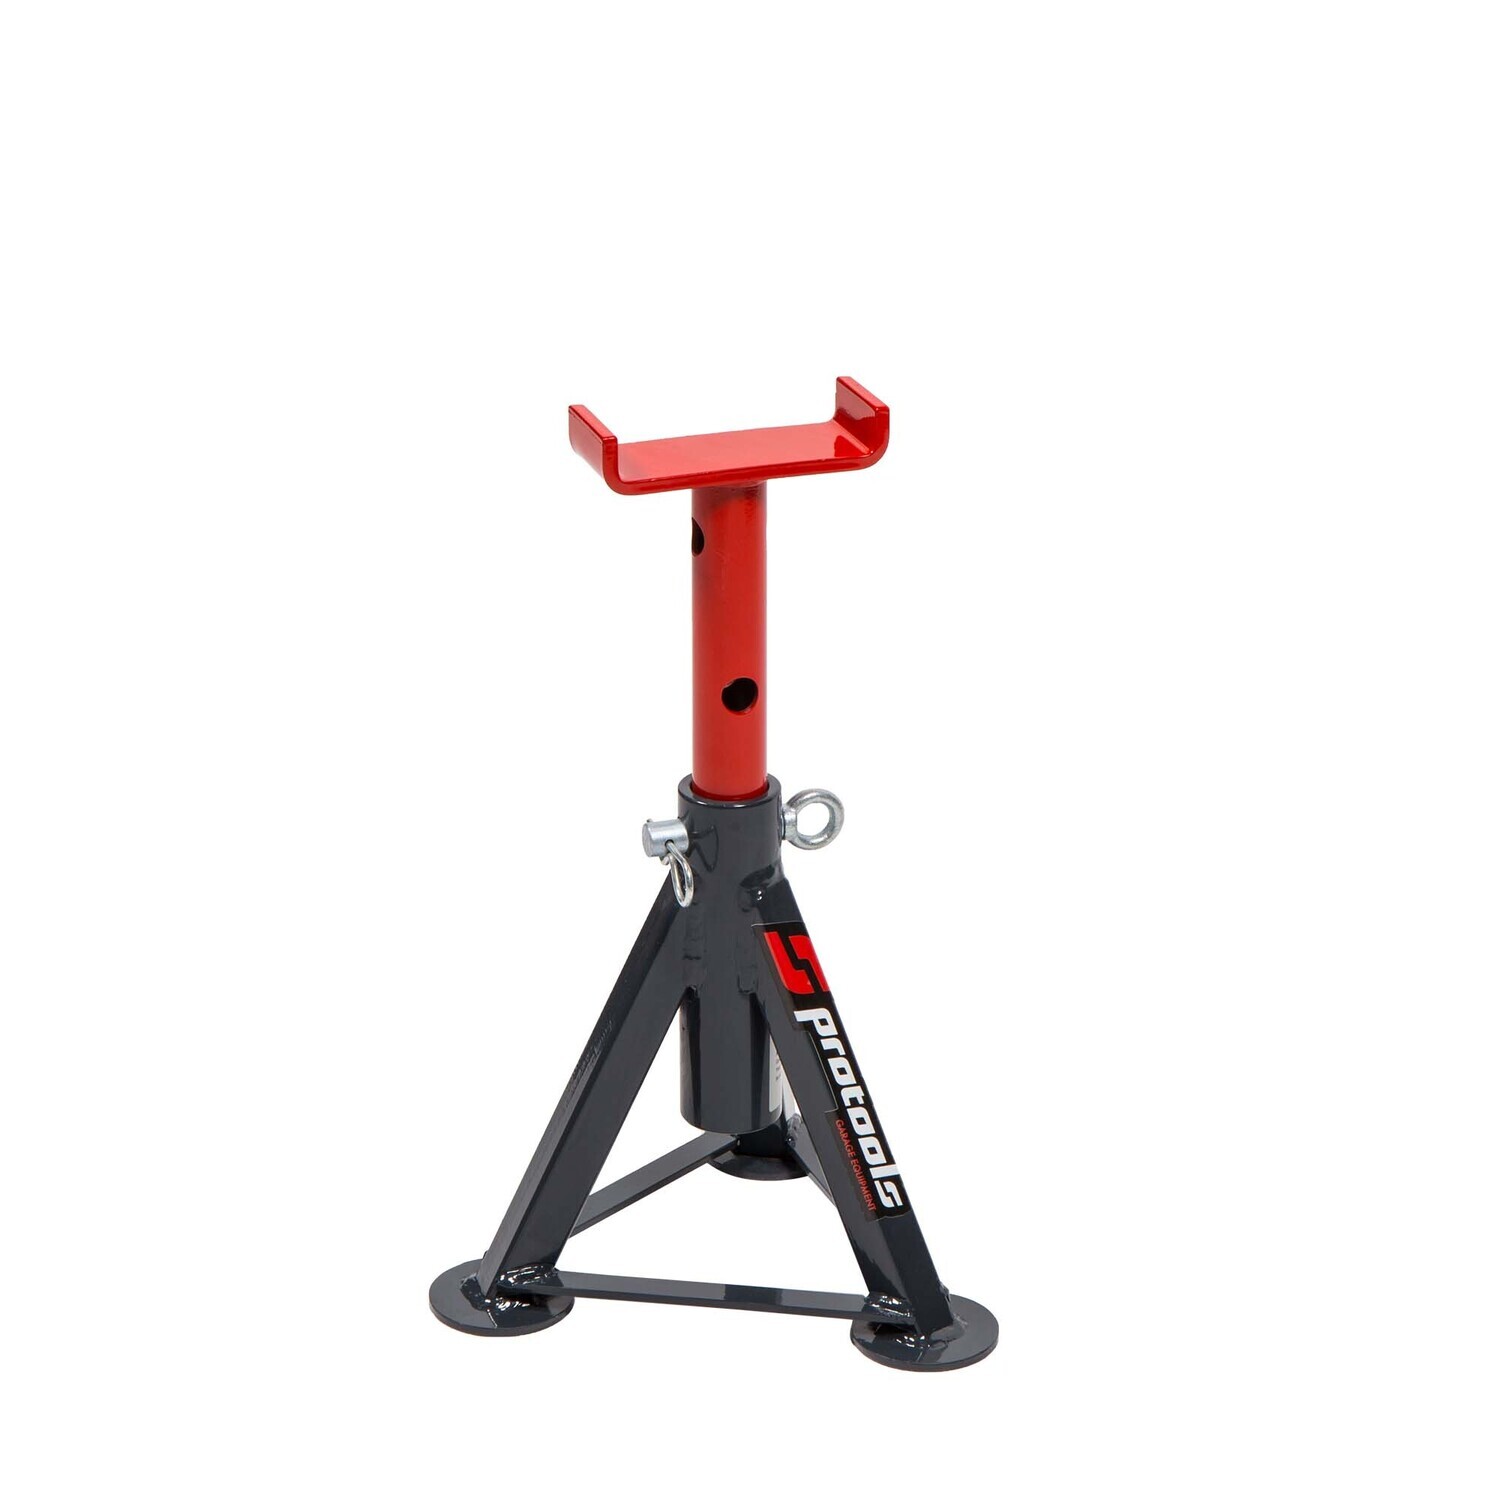 PJS005.310.1 Axle stand - Capacity 5 t